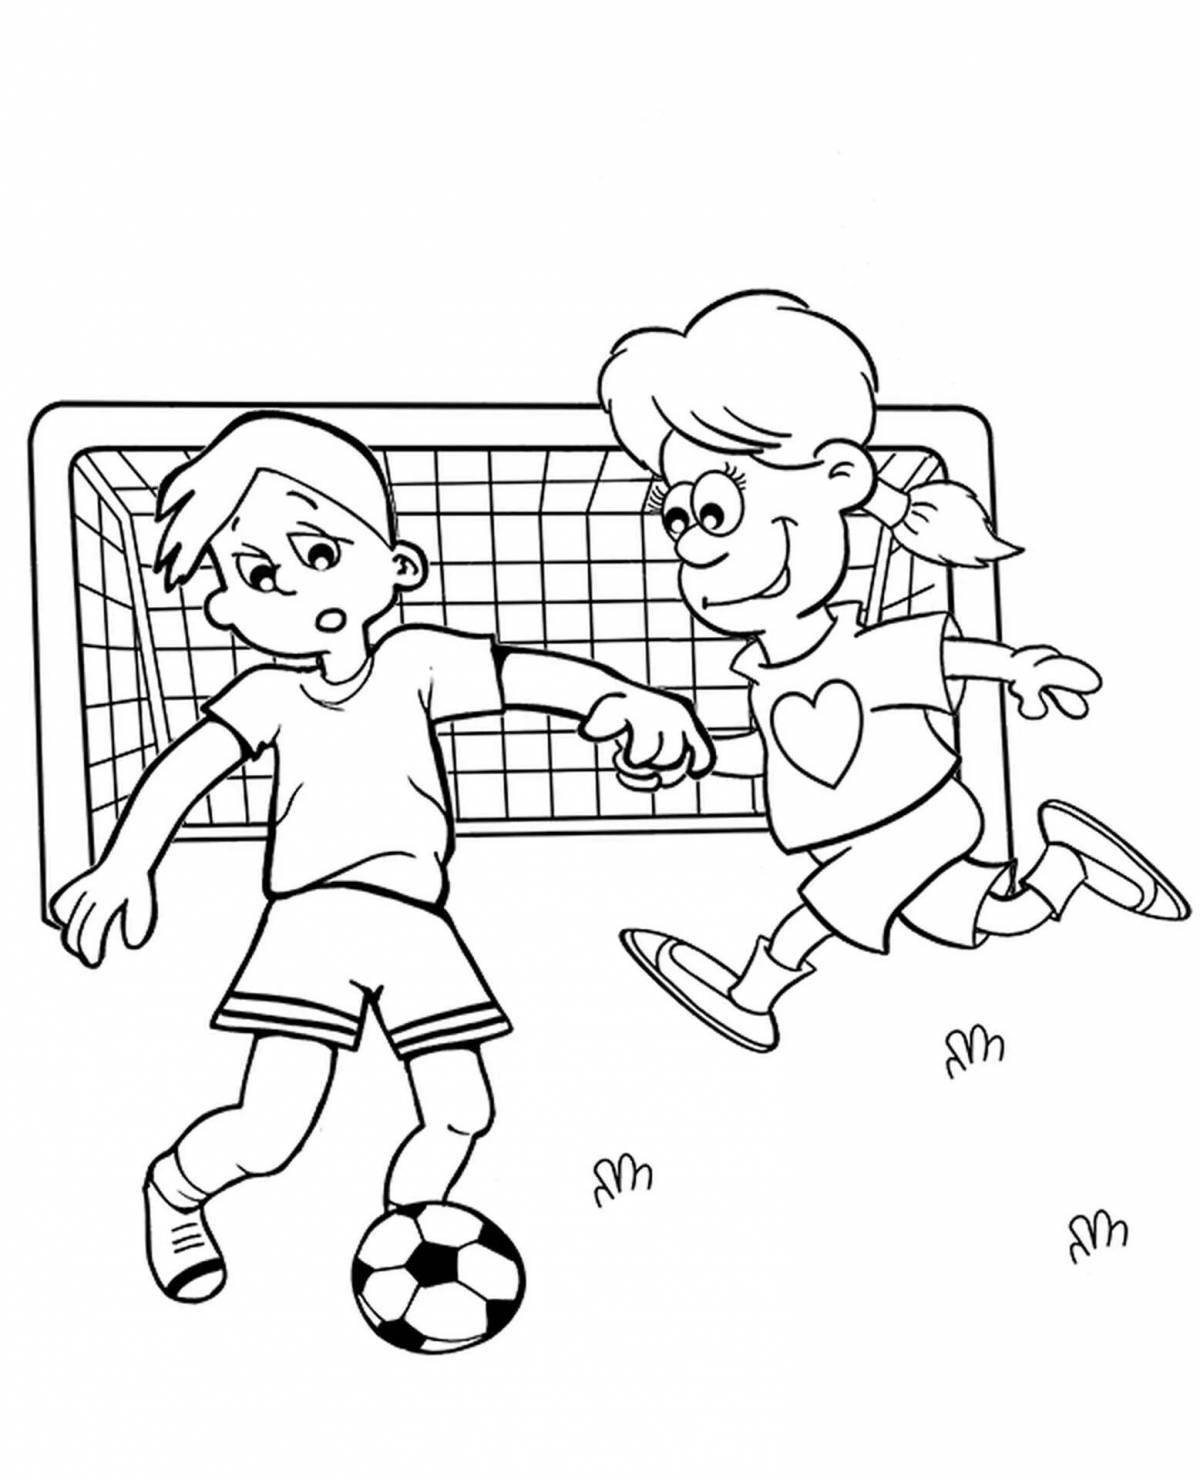 Animated football coloring book